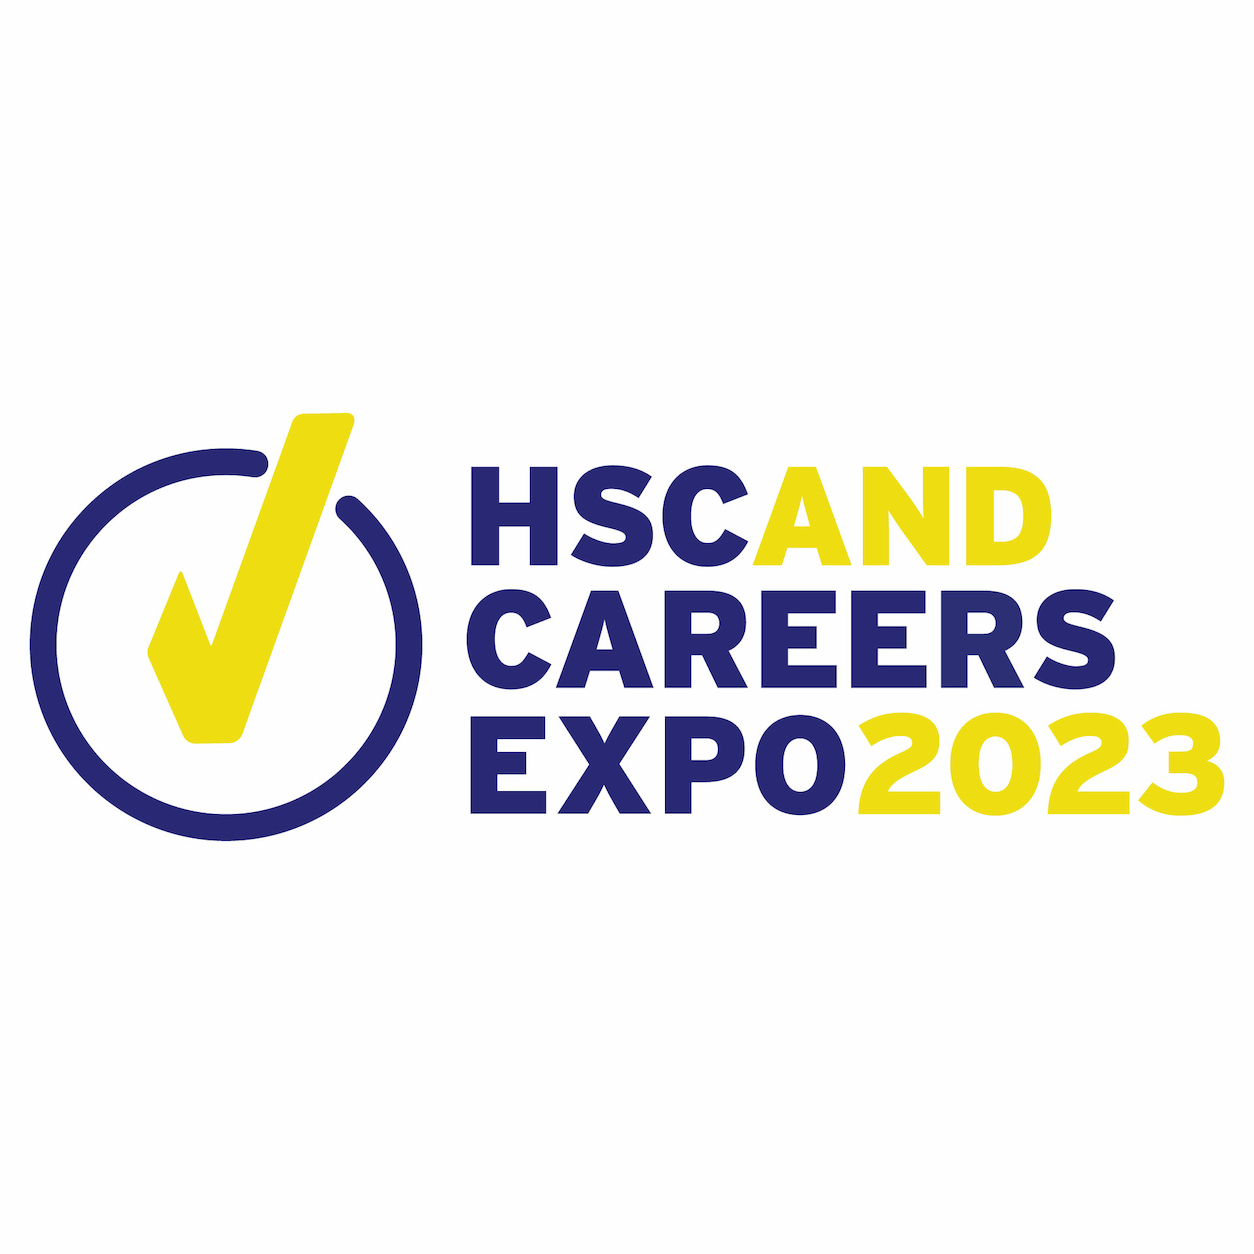 HSC AND CAREERS EXPO 2023 logo